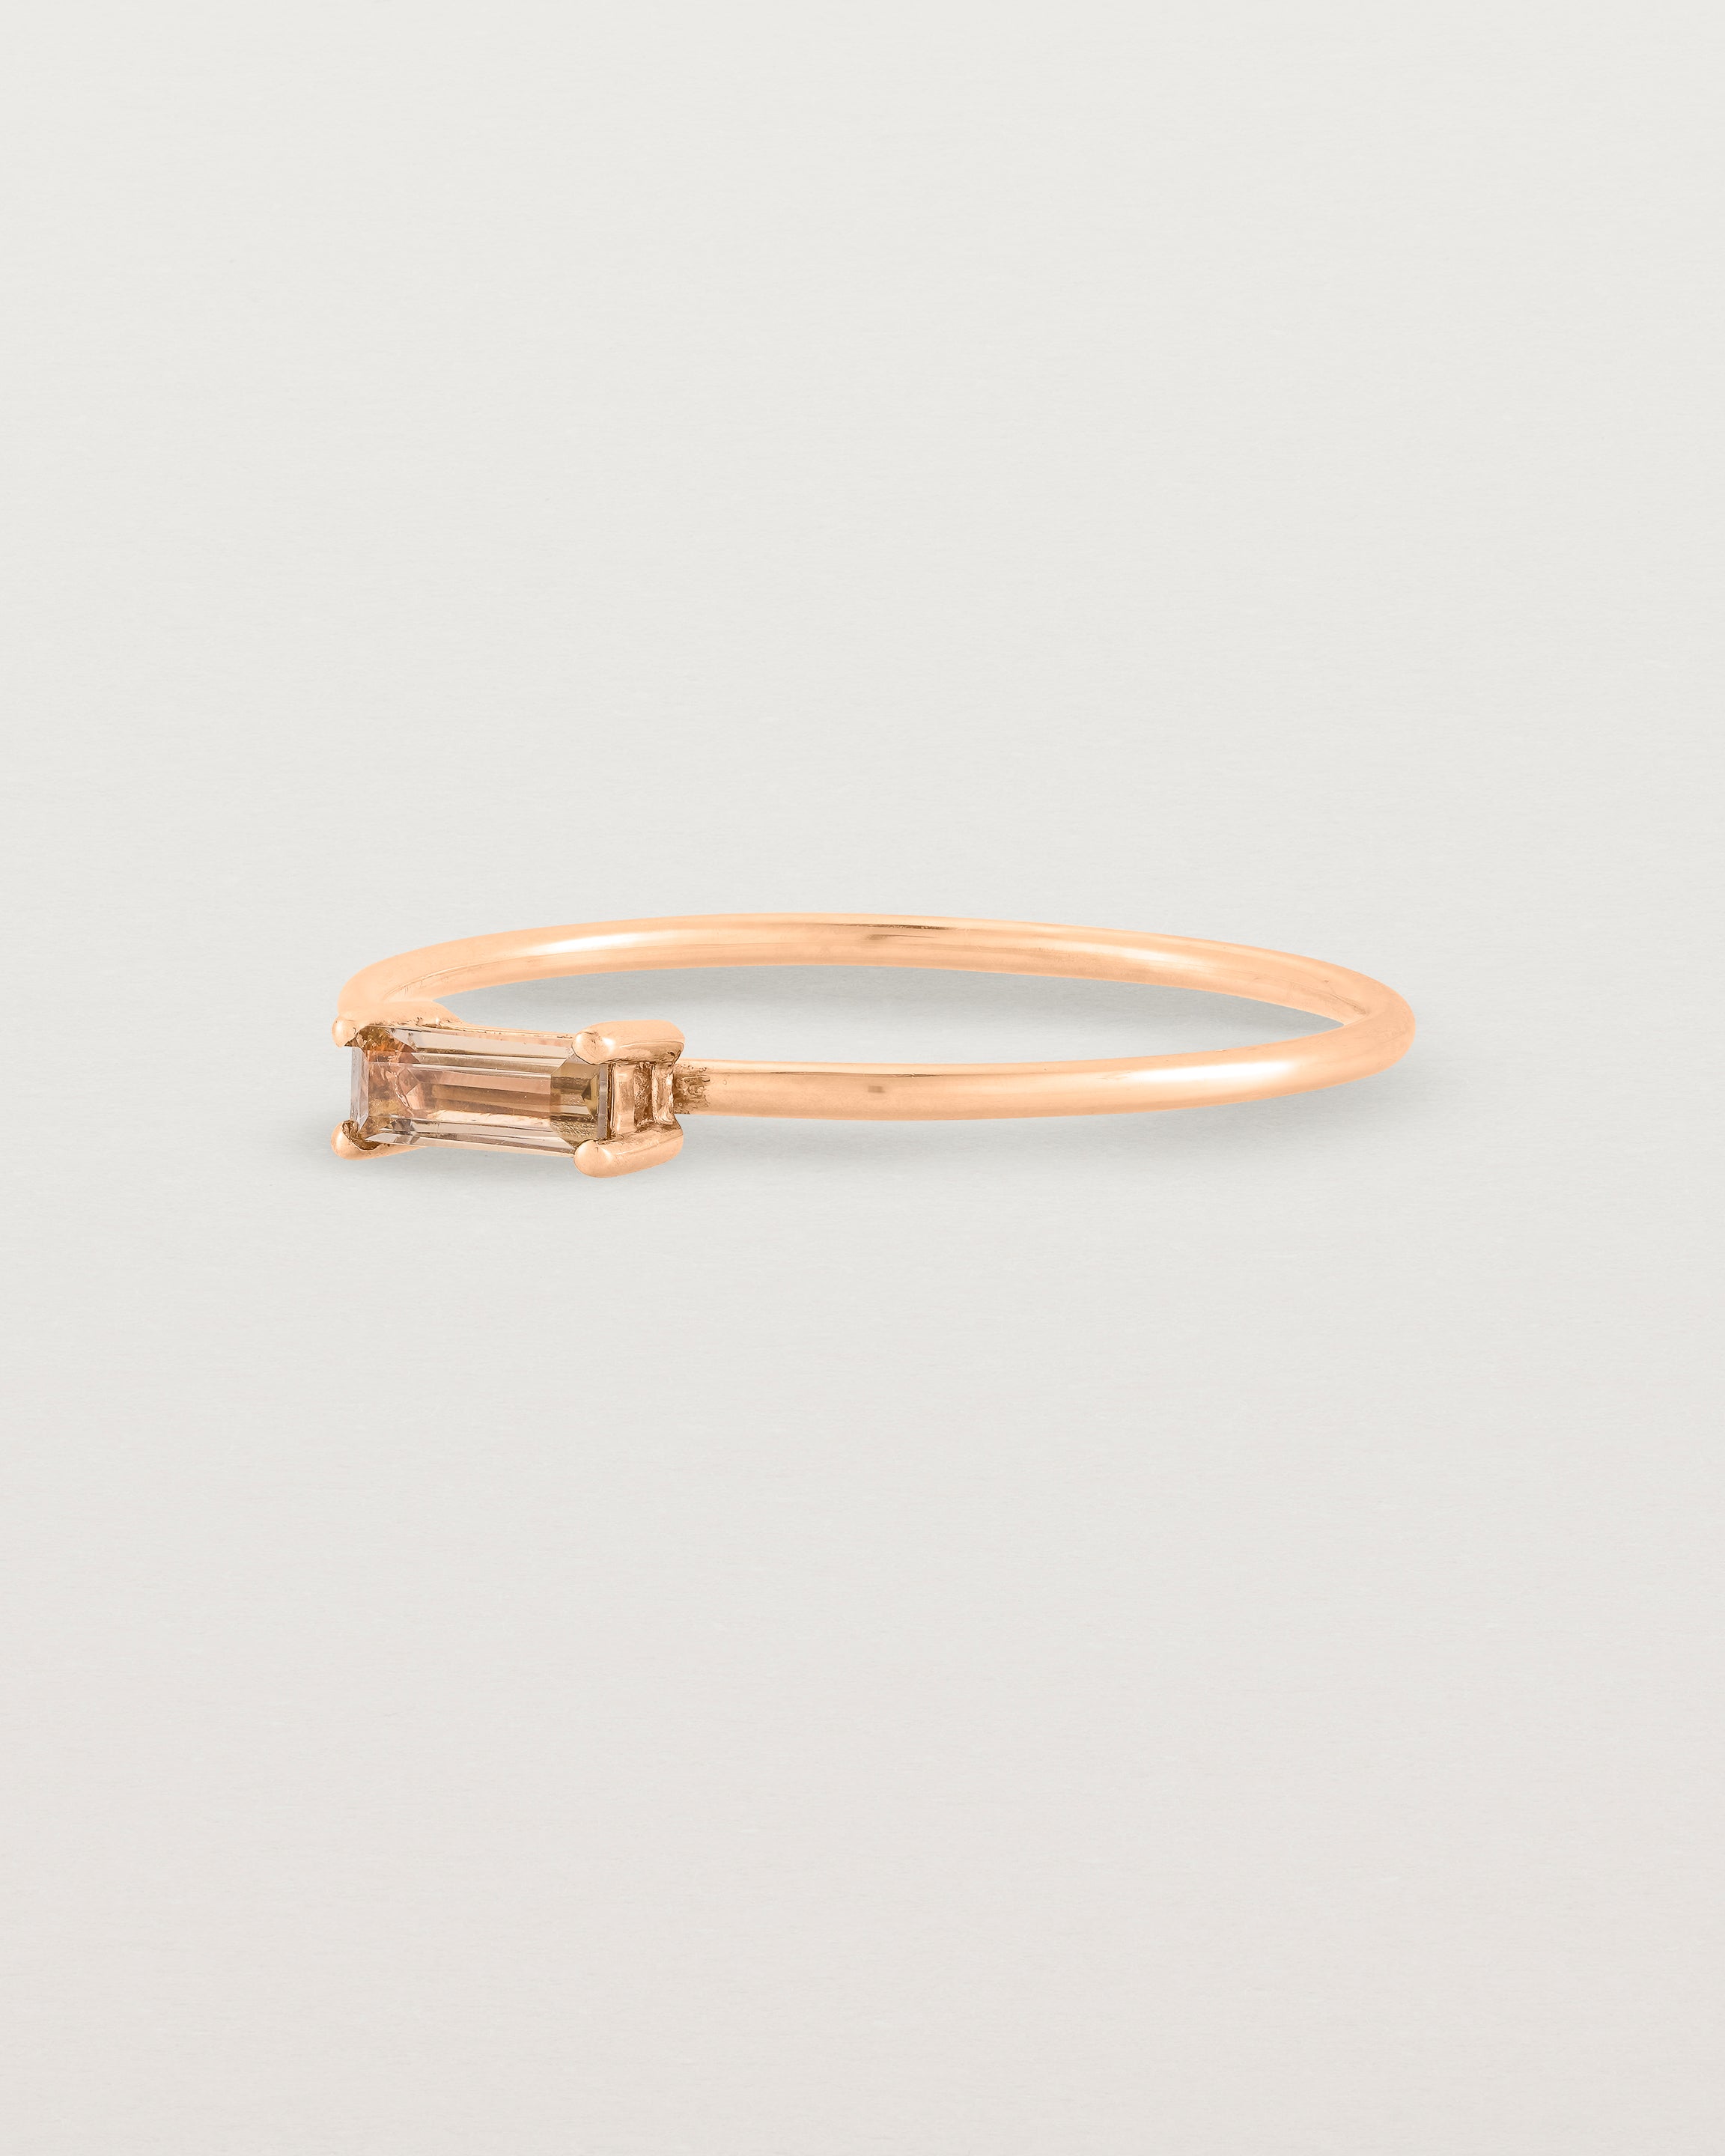 Angled view of the Horizontal Baguette Ring | Smokey Quartz in Rose Gold.